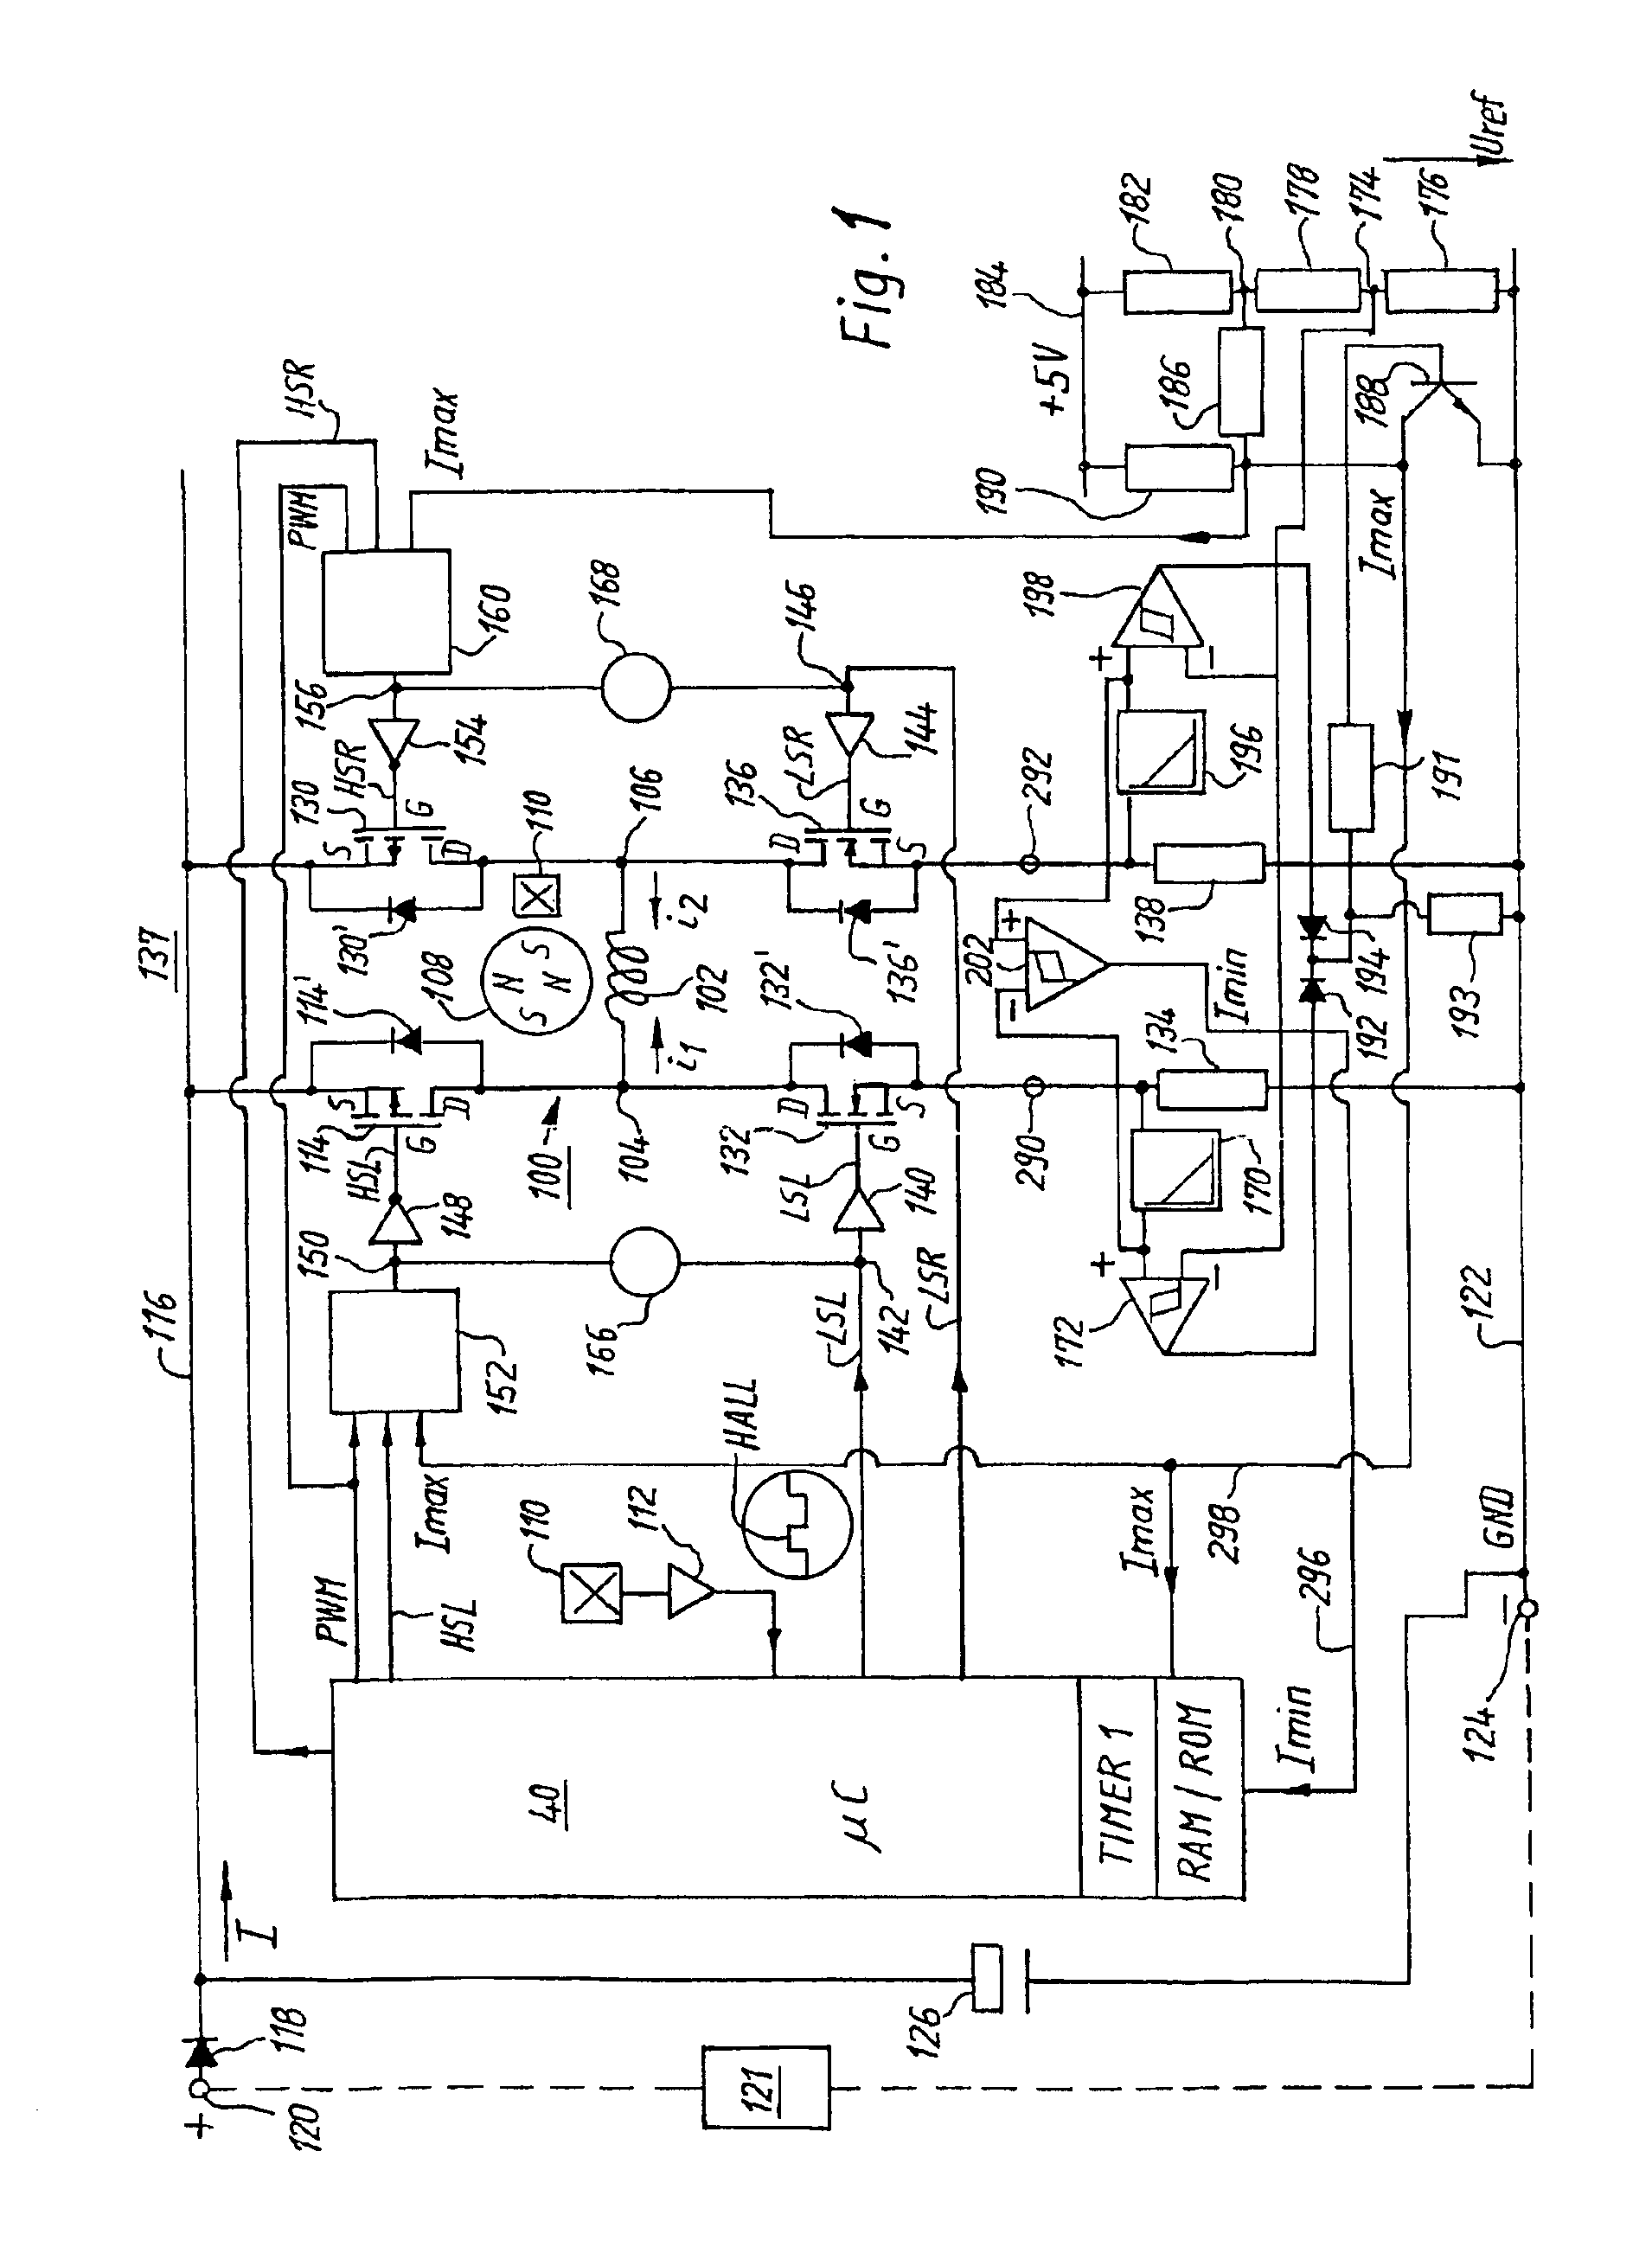 Method for limiting the current in an electric motor, and a motor for carrying out one such method